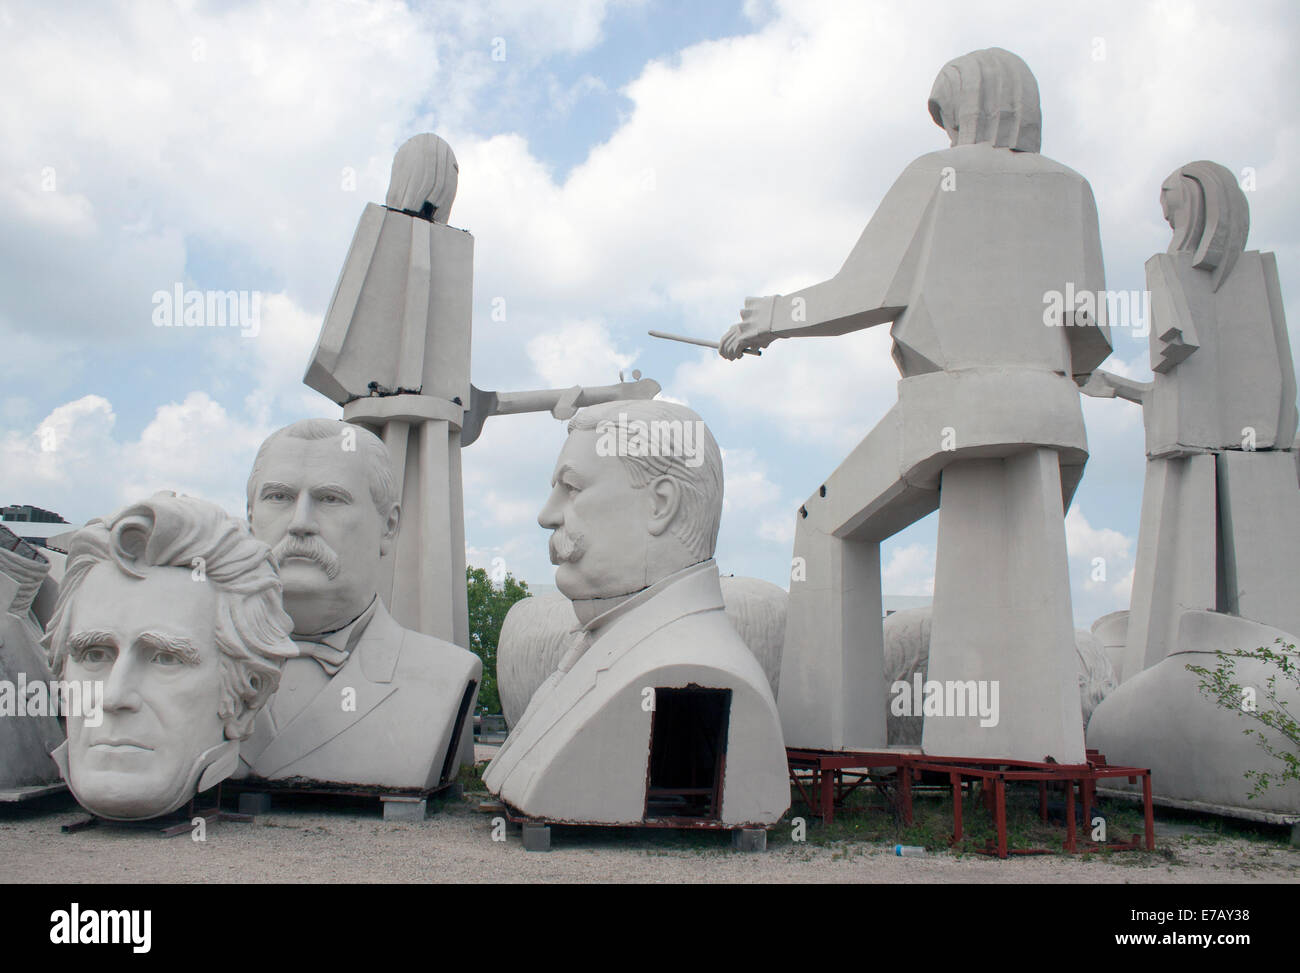 Giant sculpture of the Beatles and Presidents heads in Houston Texas Stock Photo